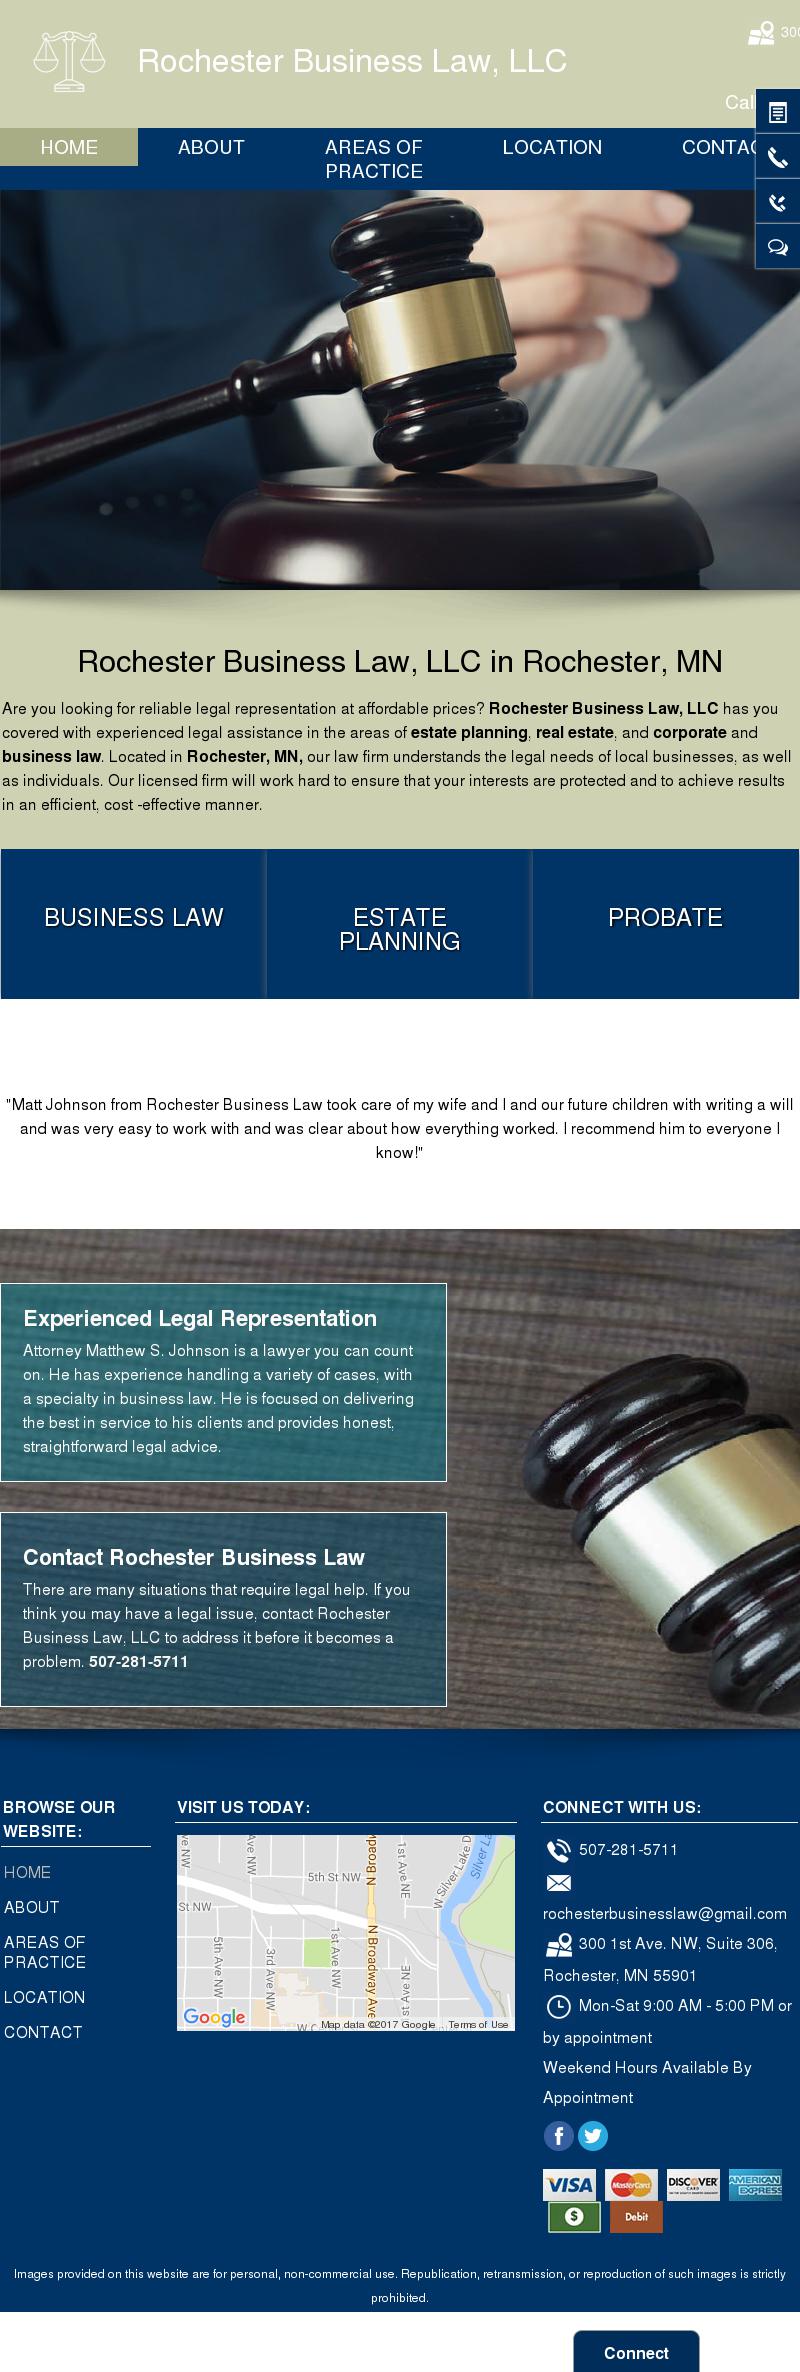 Rochester Business Law Center - Rochester MN Lawyers